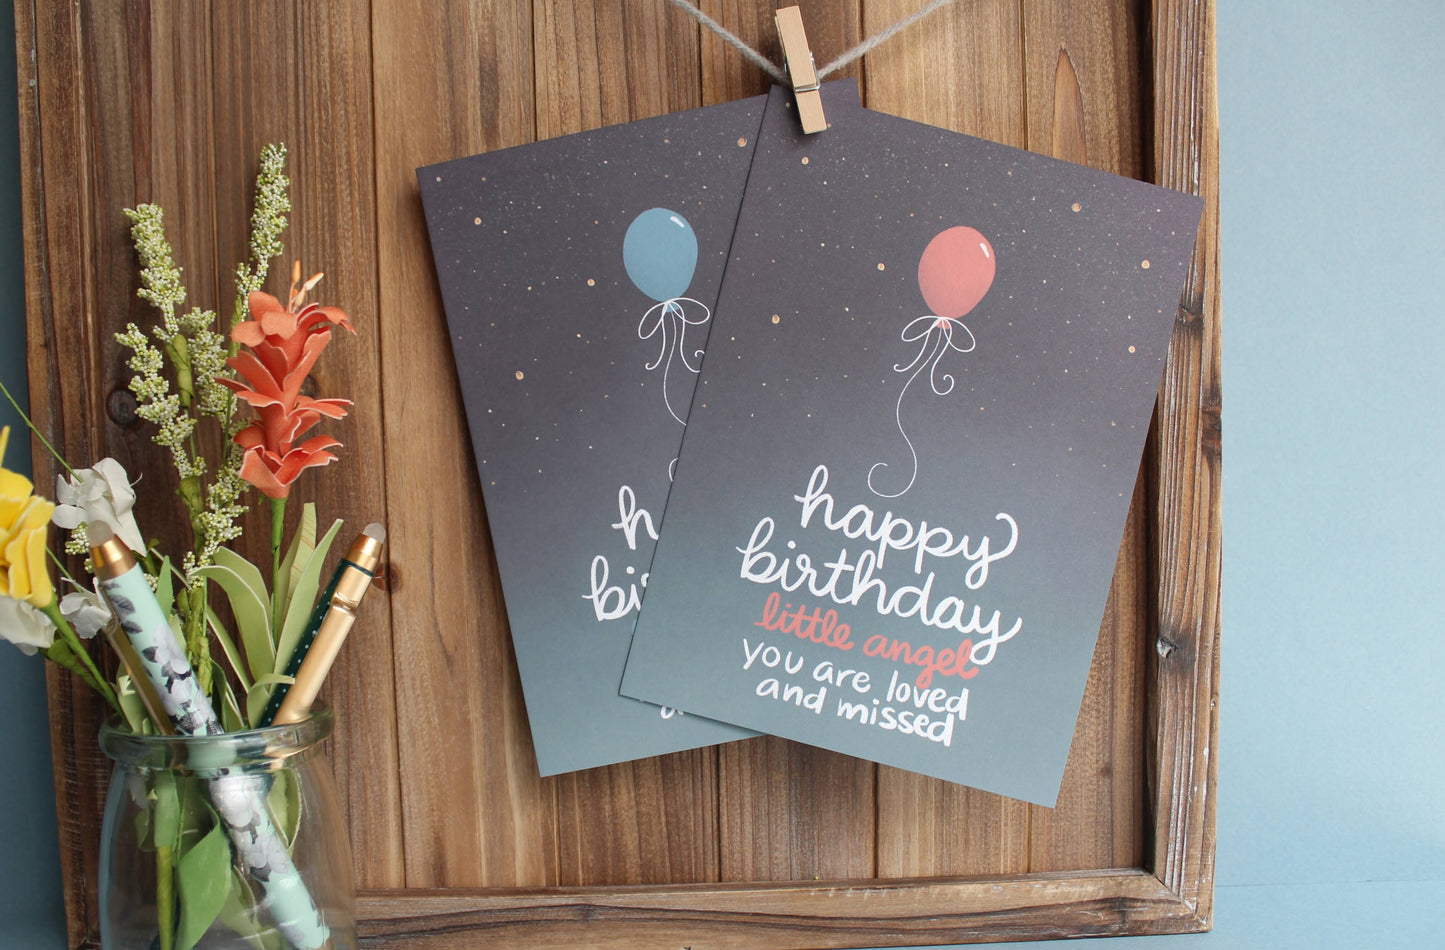 “Happy Birthday little Angel” Birthday card for pregnancy and infant loss